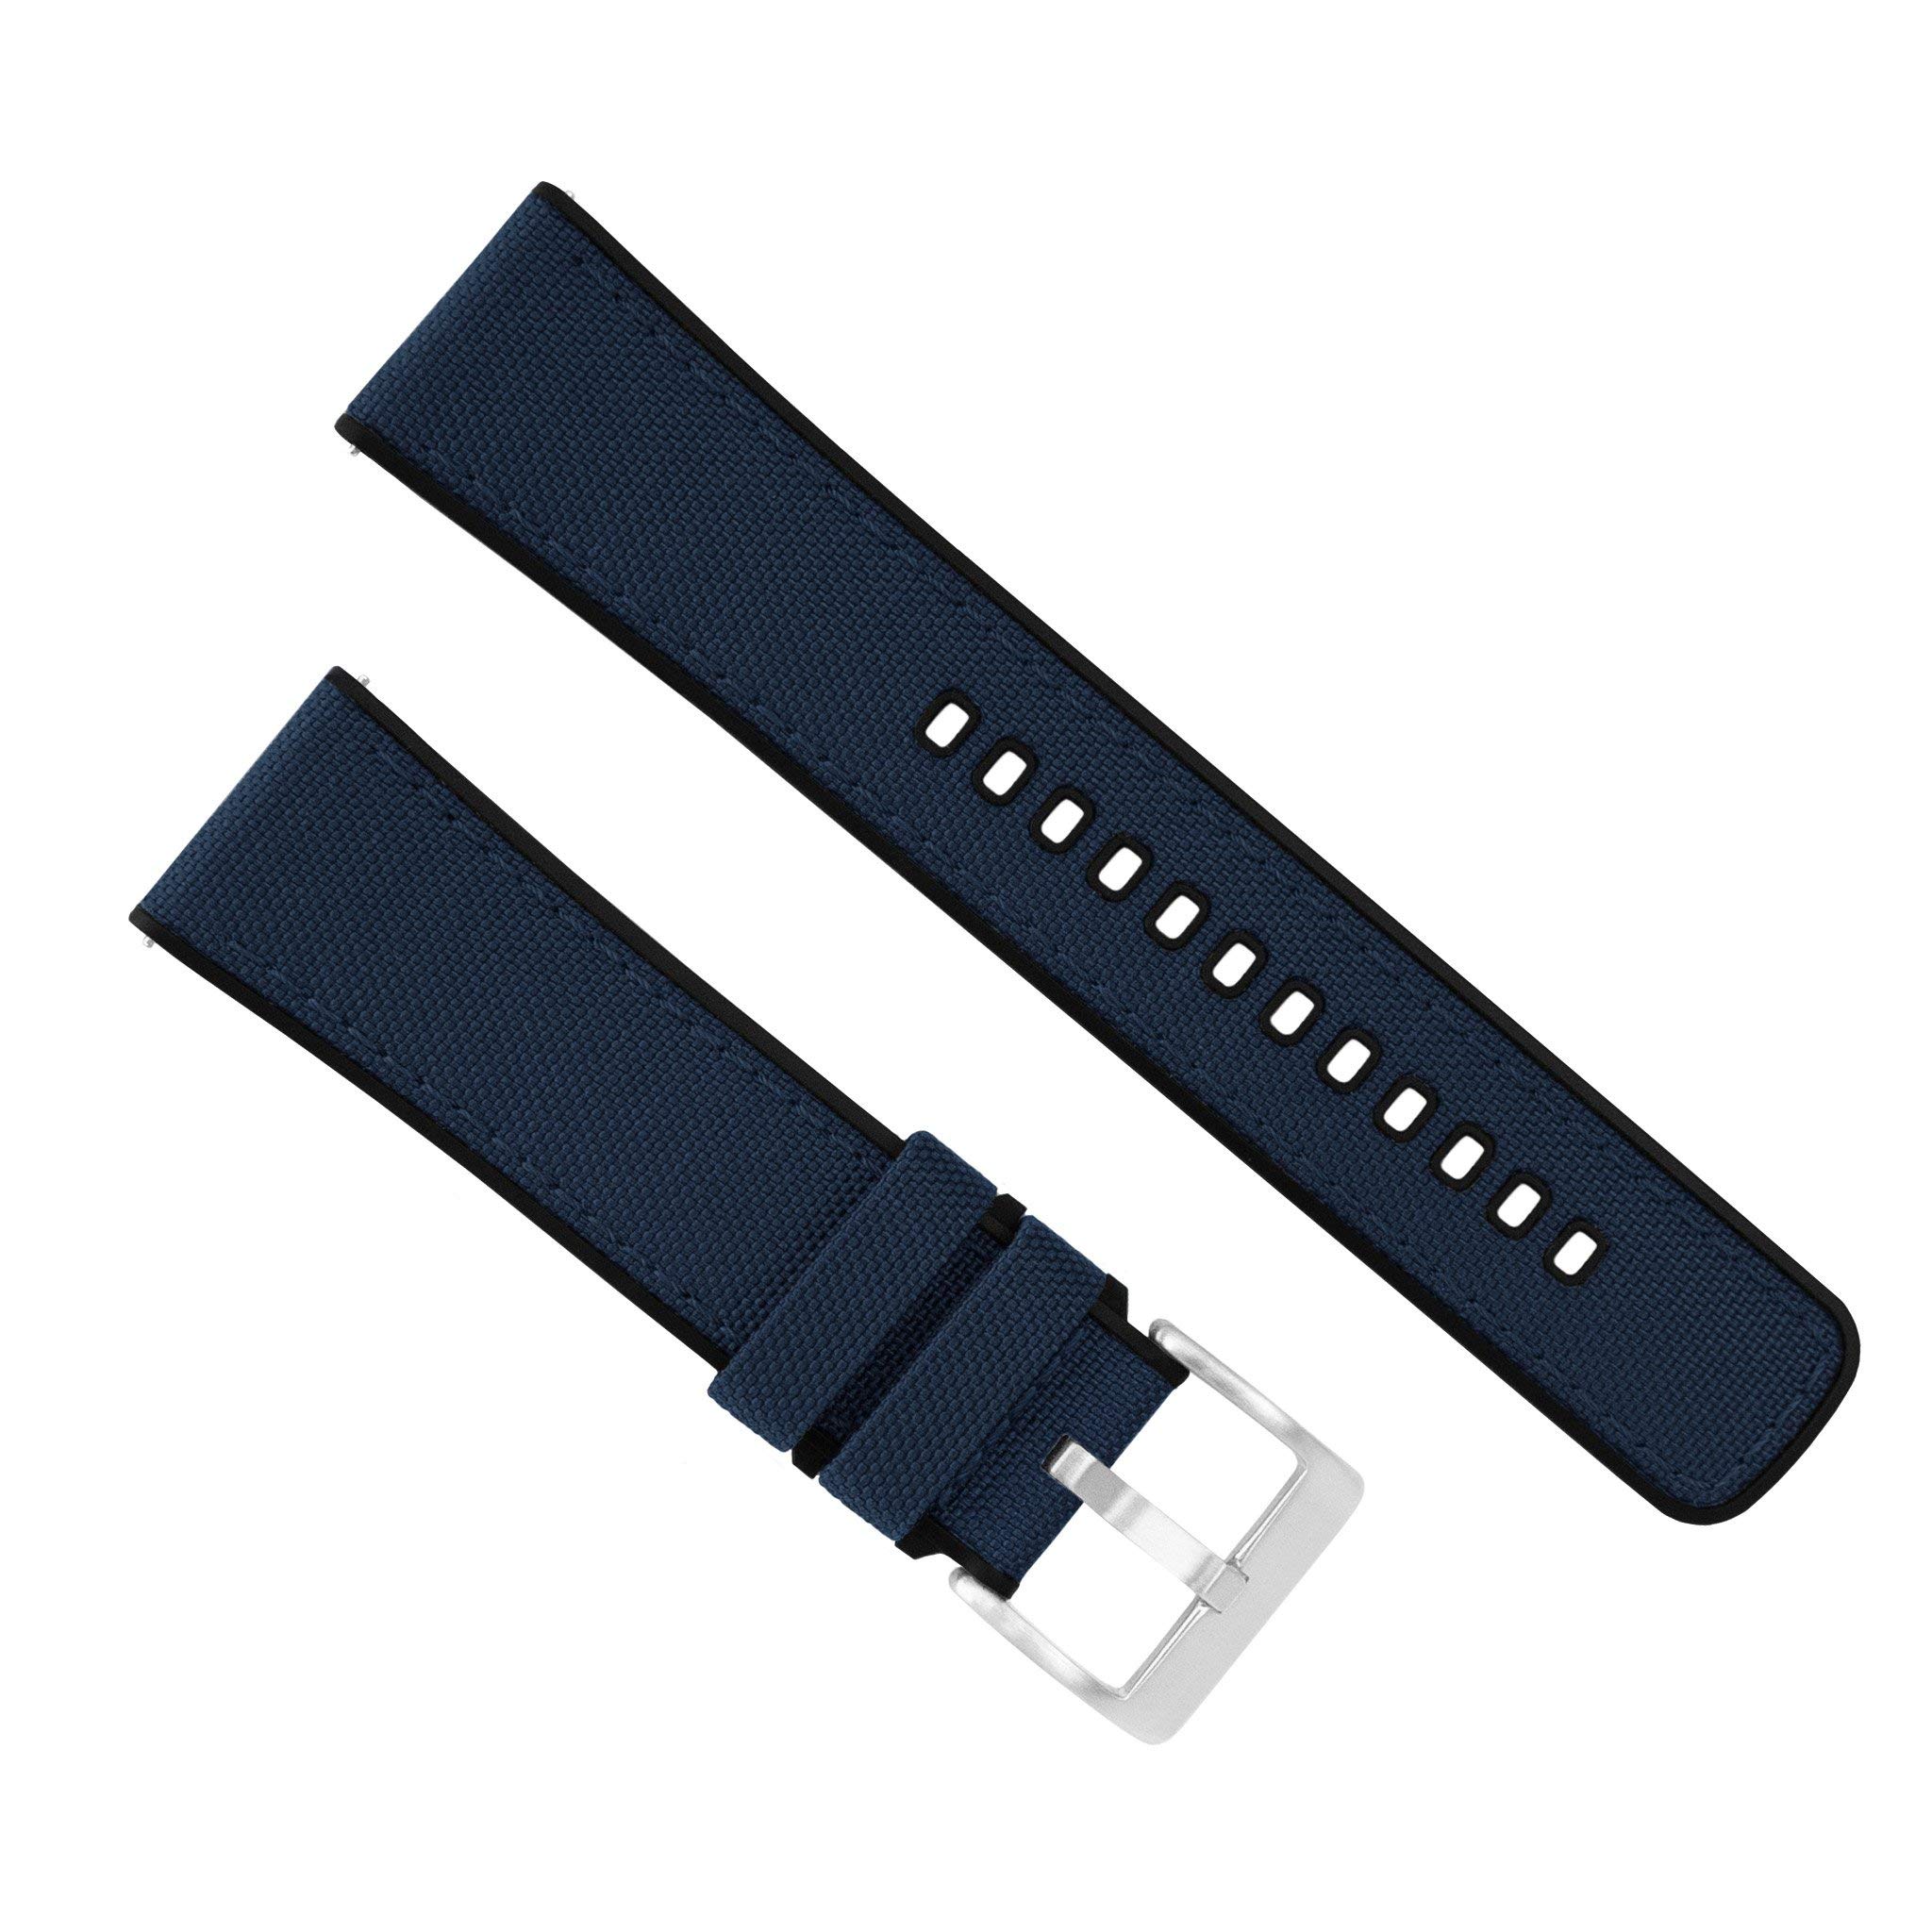 BARTON WATCH BANDS with Integrated quick release spring bars- Cordura Fabric and Silicone- Cordura Fabric and Silicone Hybrid Watch Bands - Choice of Color & Width (18mm, 20mm, 22mm)